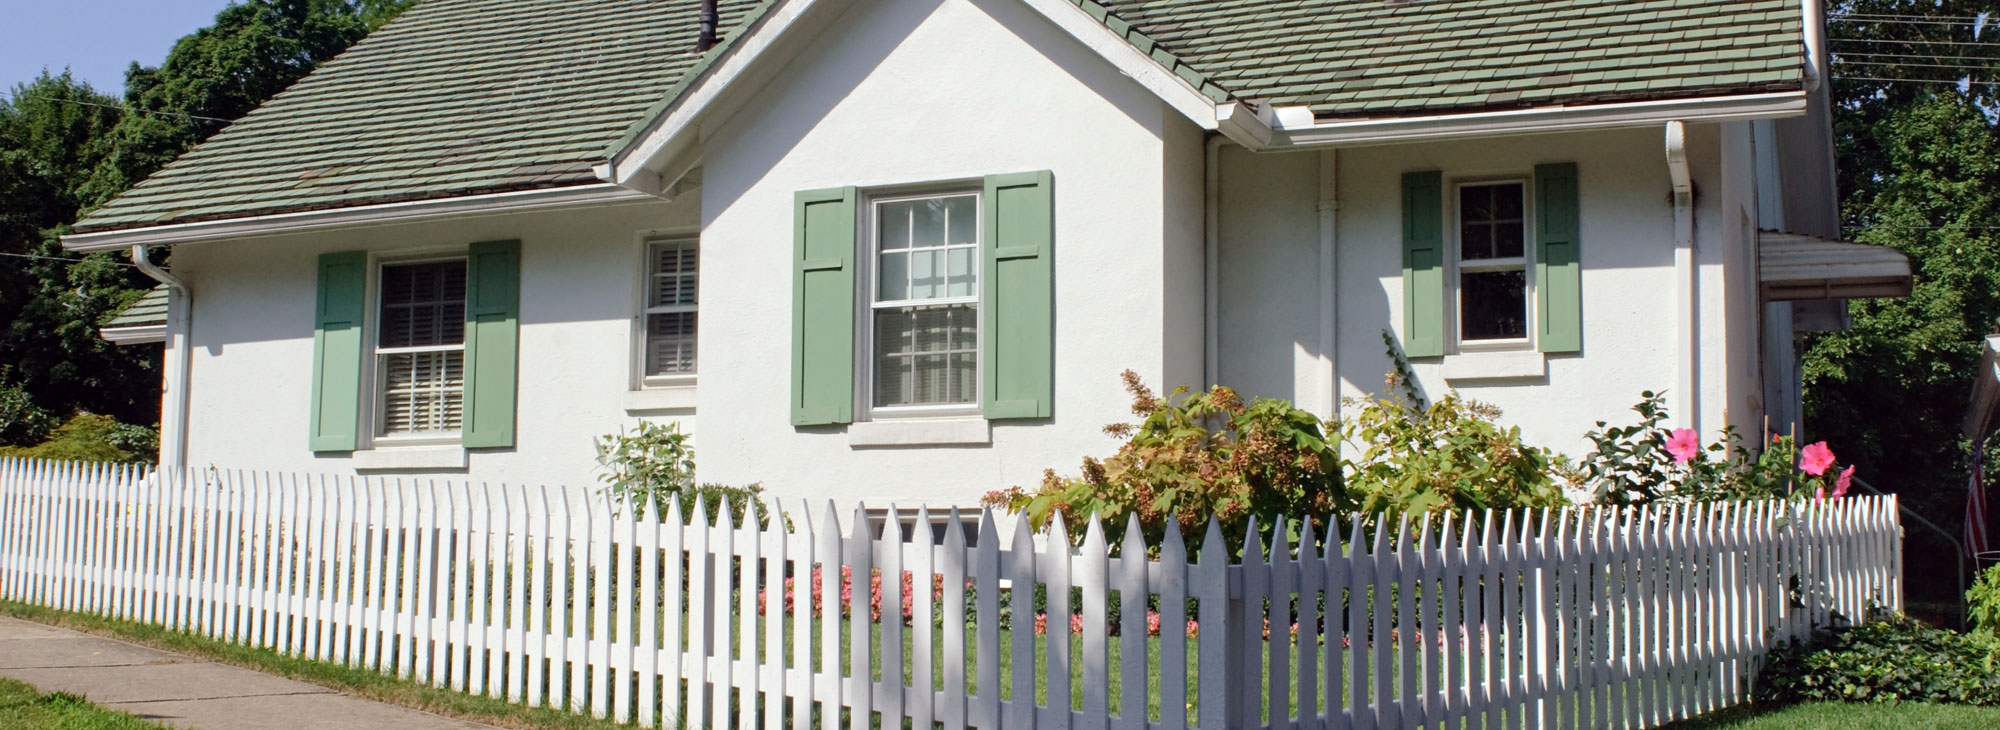 Picket Fence in front of a House